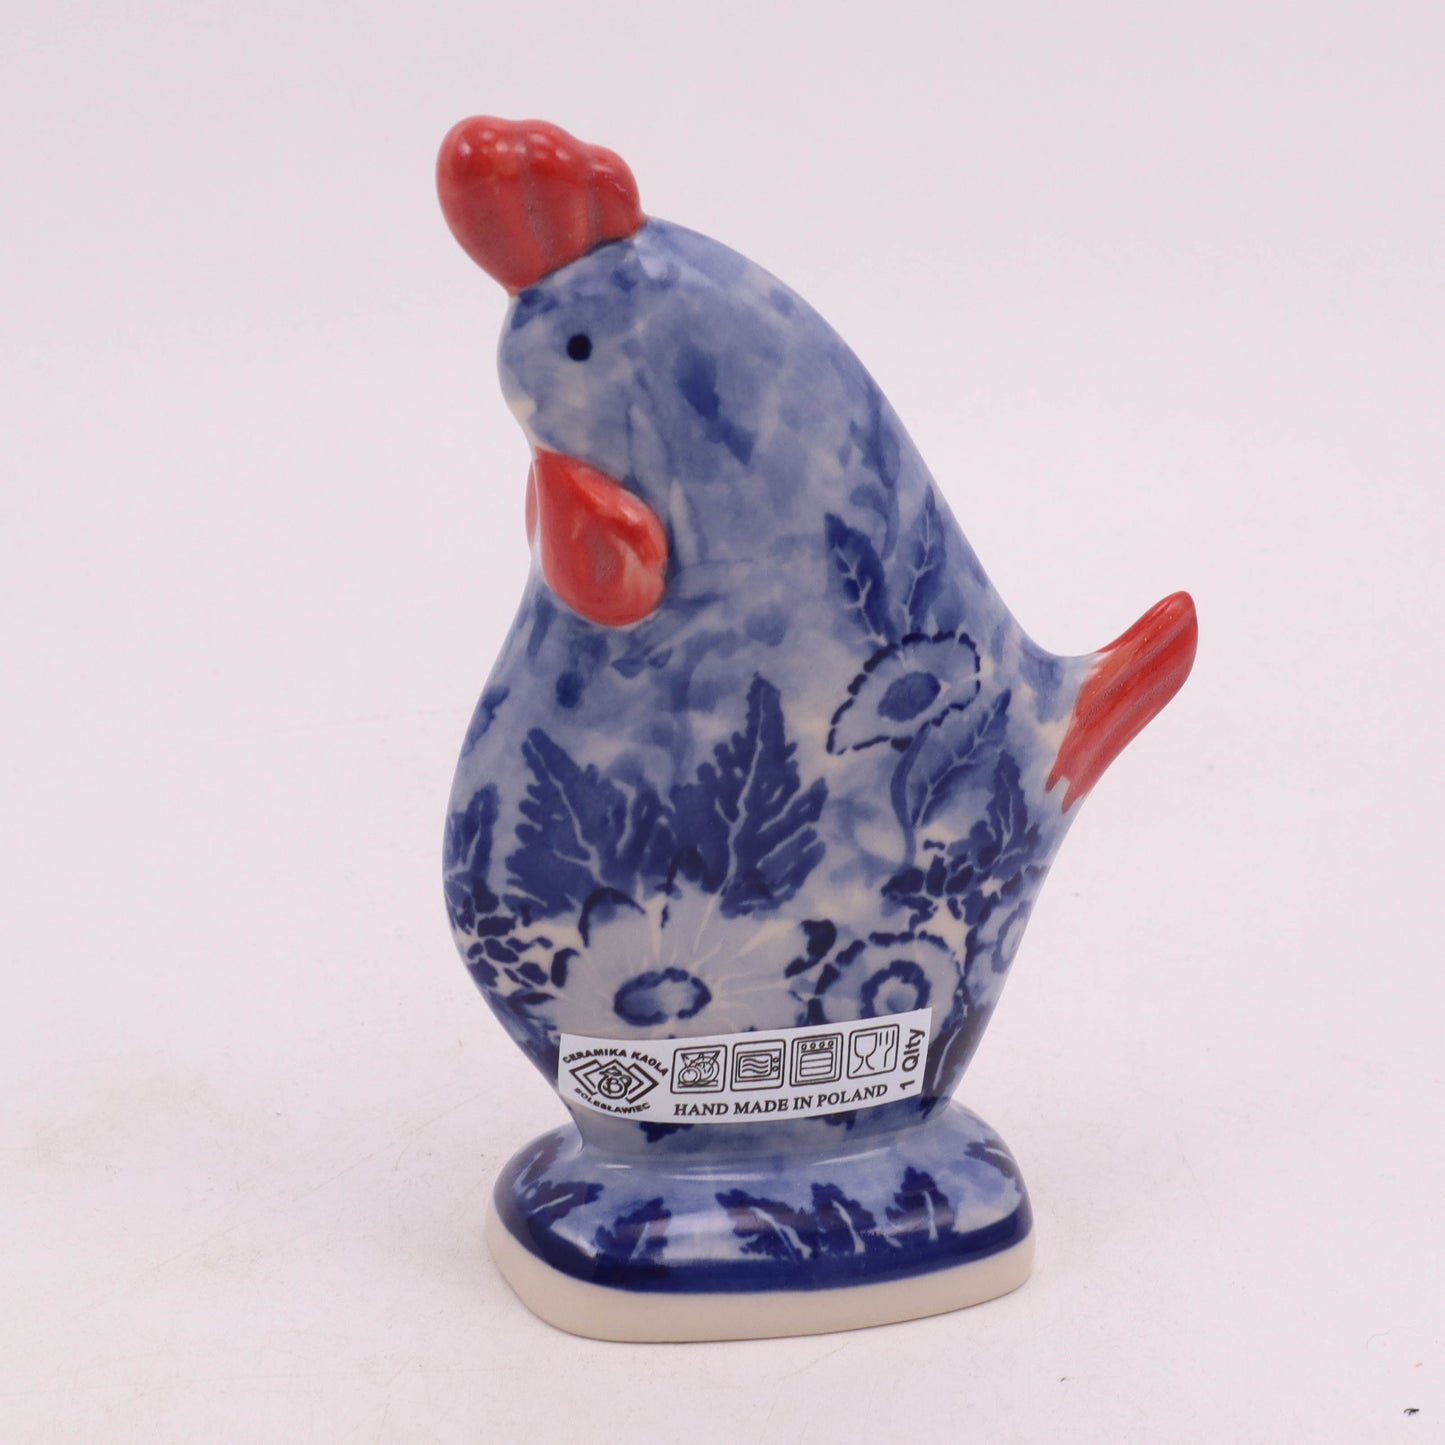 4"x6" Rooster Figurine. Pattern: Watercolor Blossoms Full